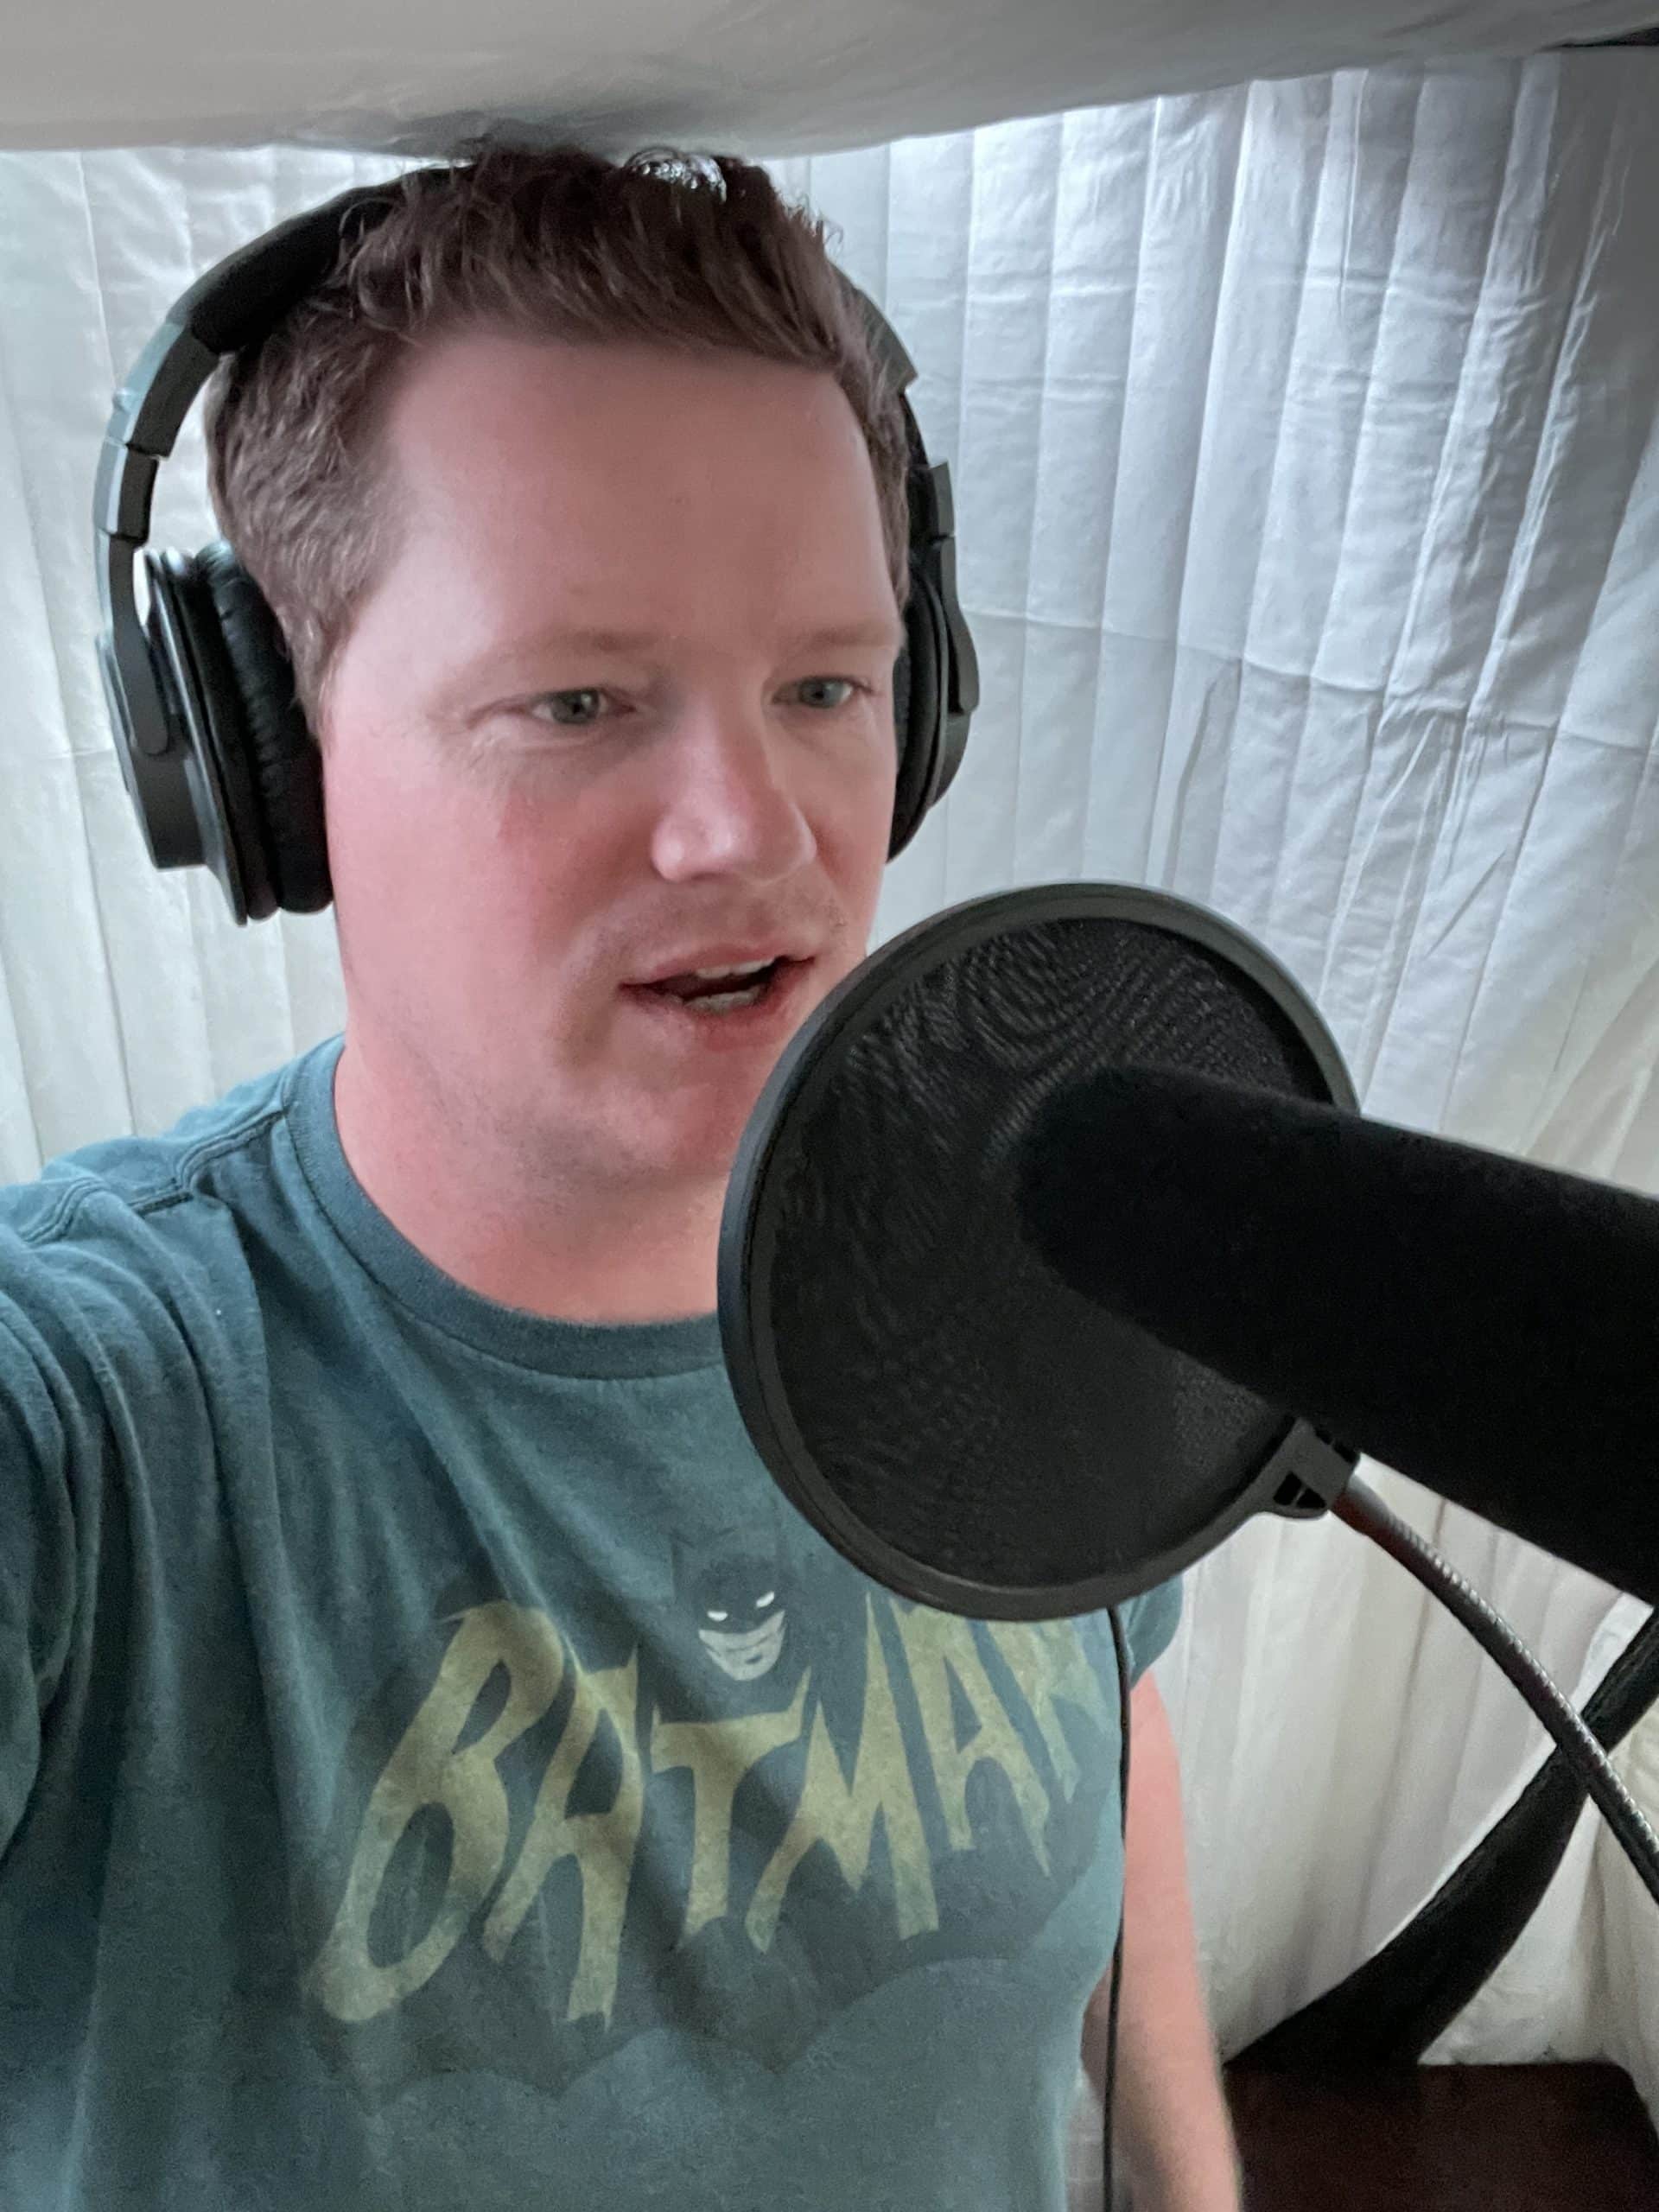 voice over artist Mike Thomas working in his vocal booth